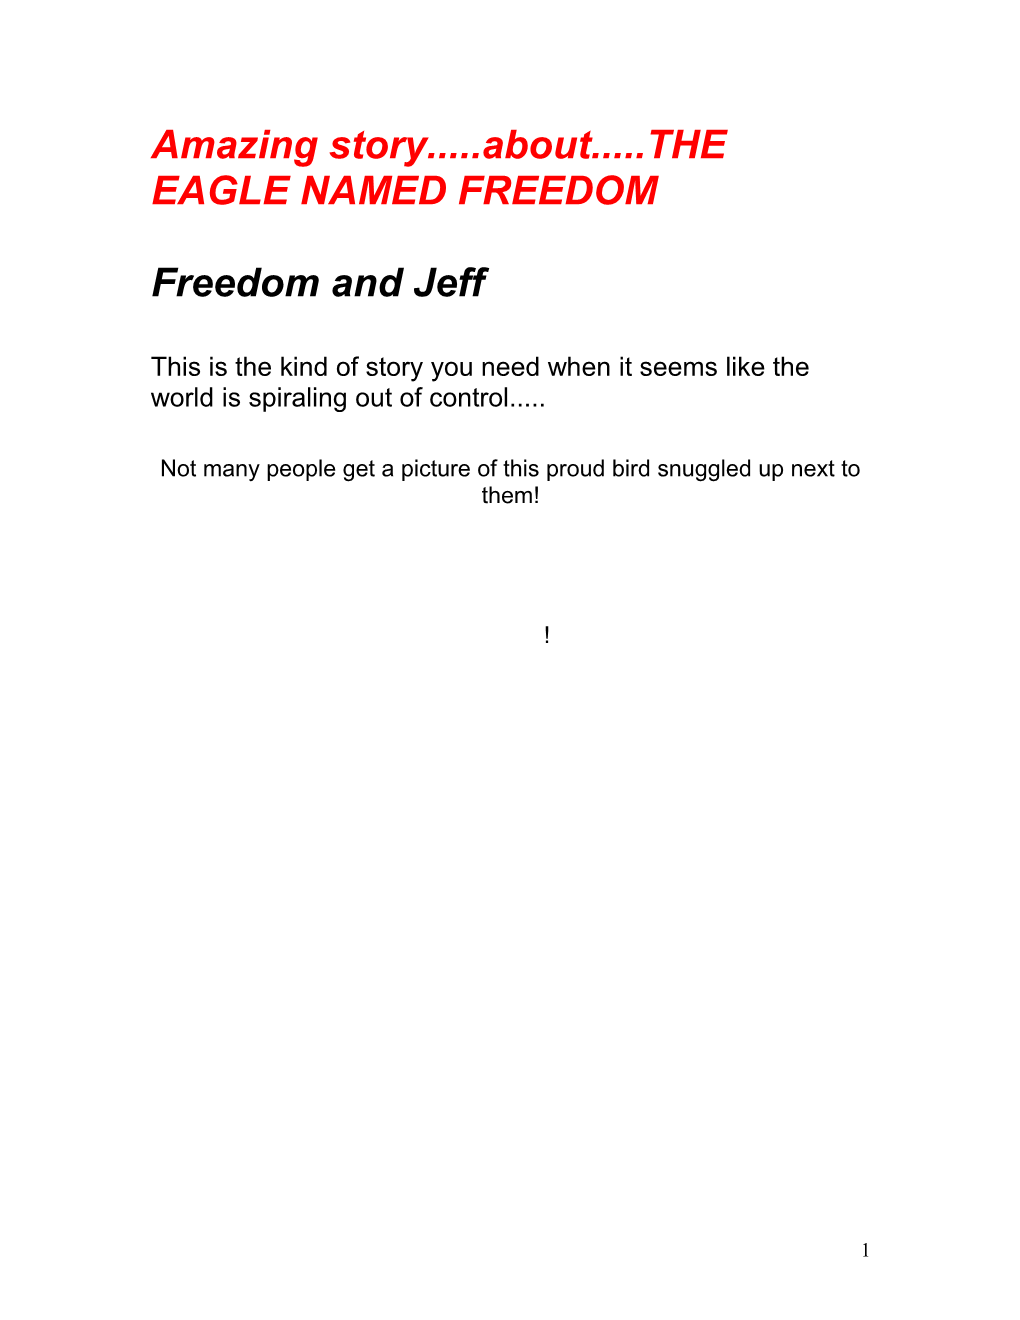 Amazing Story About the EAGLE NAMED FREEDOM